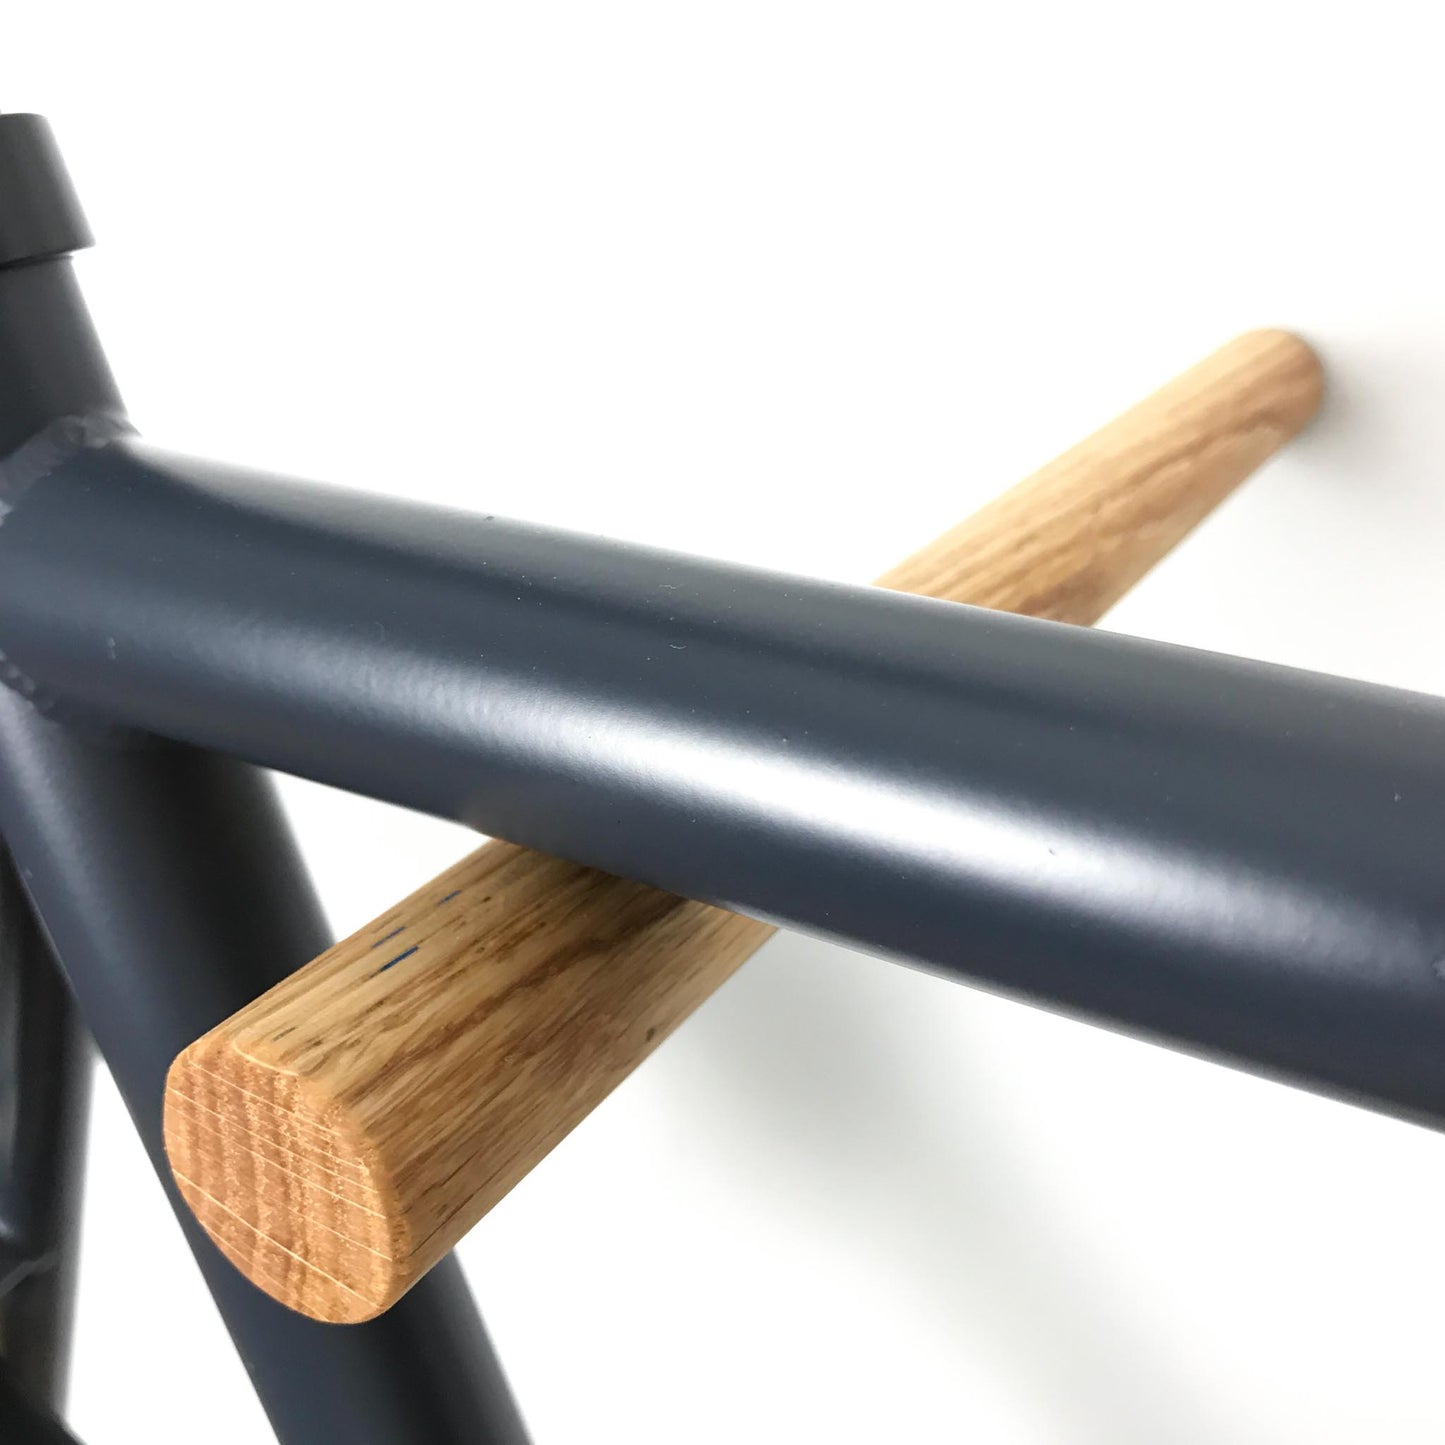 Wooden Bike Hooks for In-Home Storage